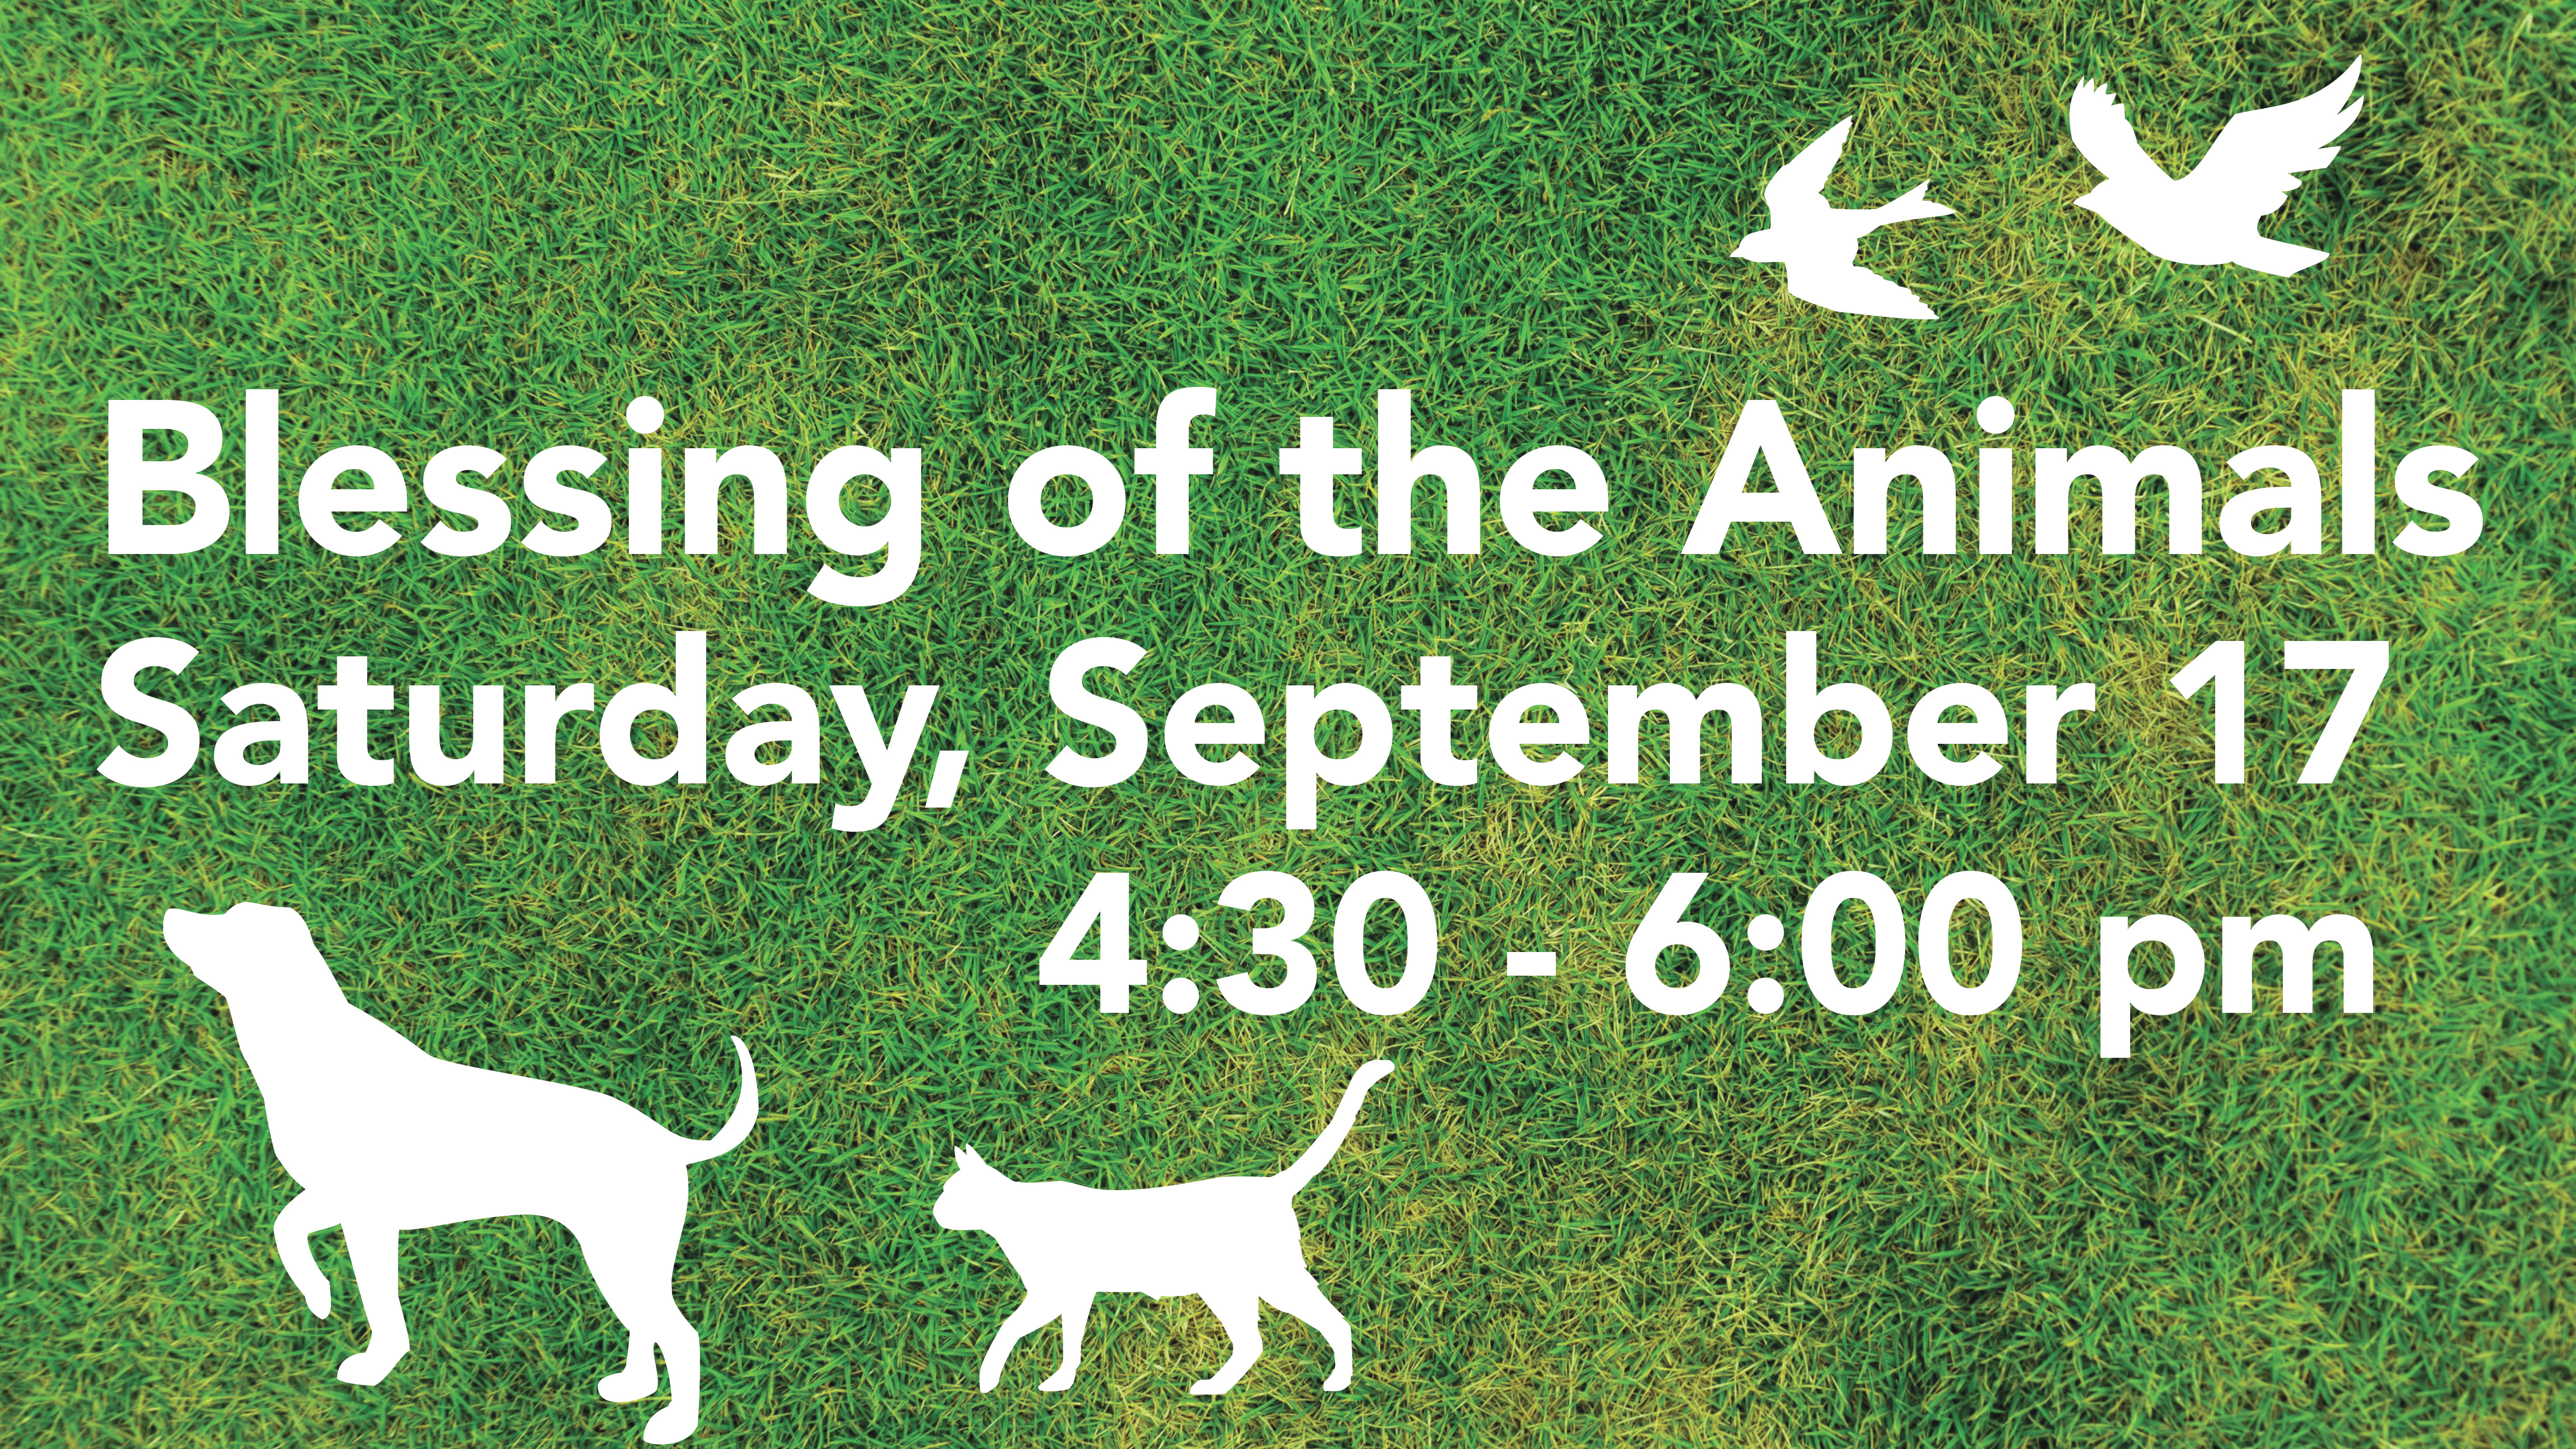 Announcement slide - Blessing of the Animals (no border)